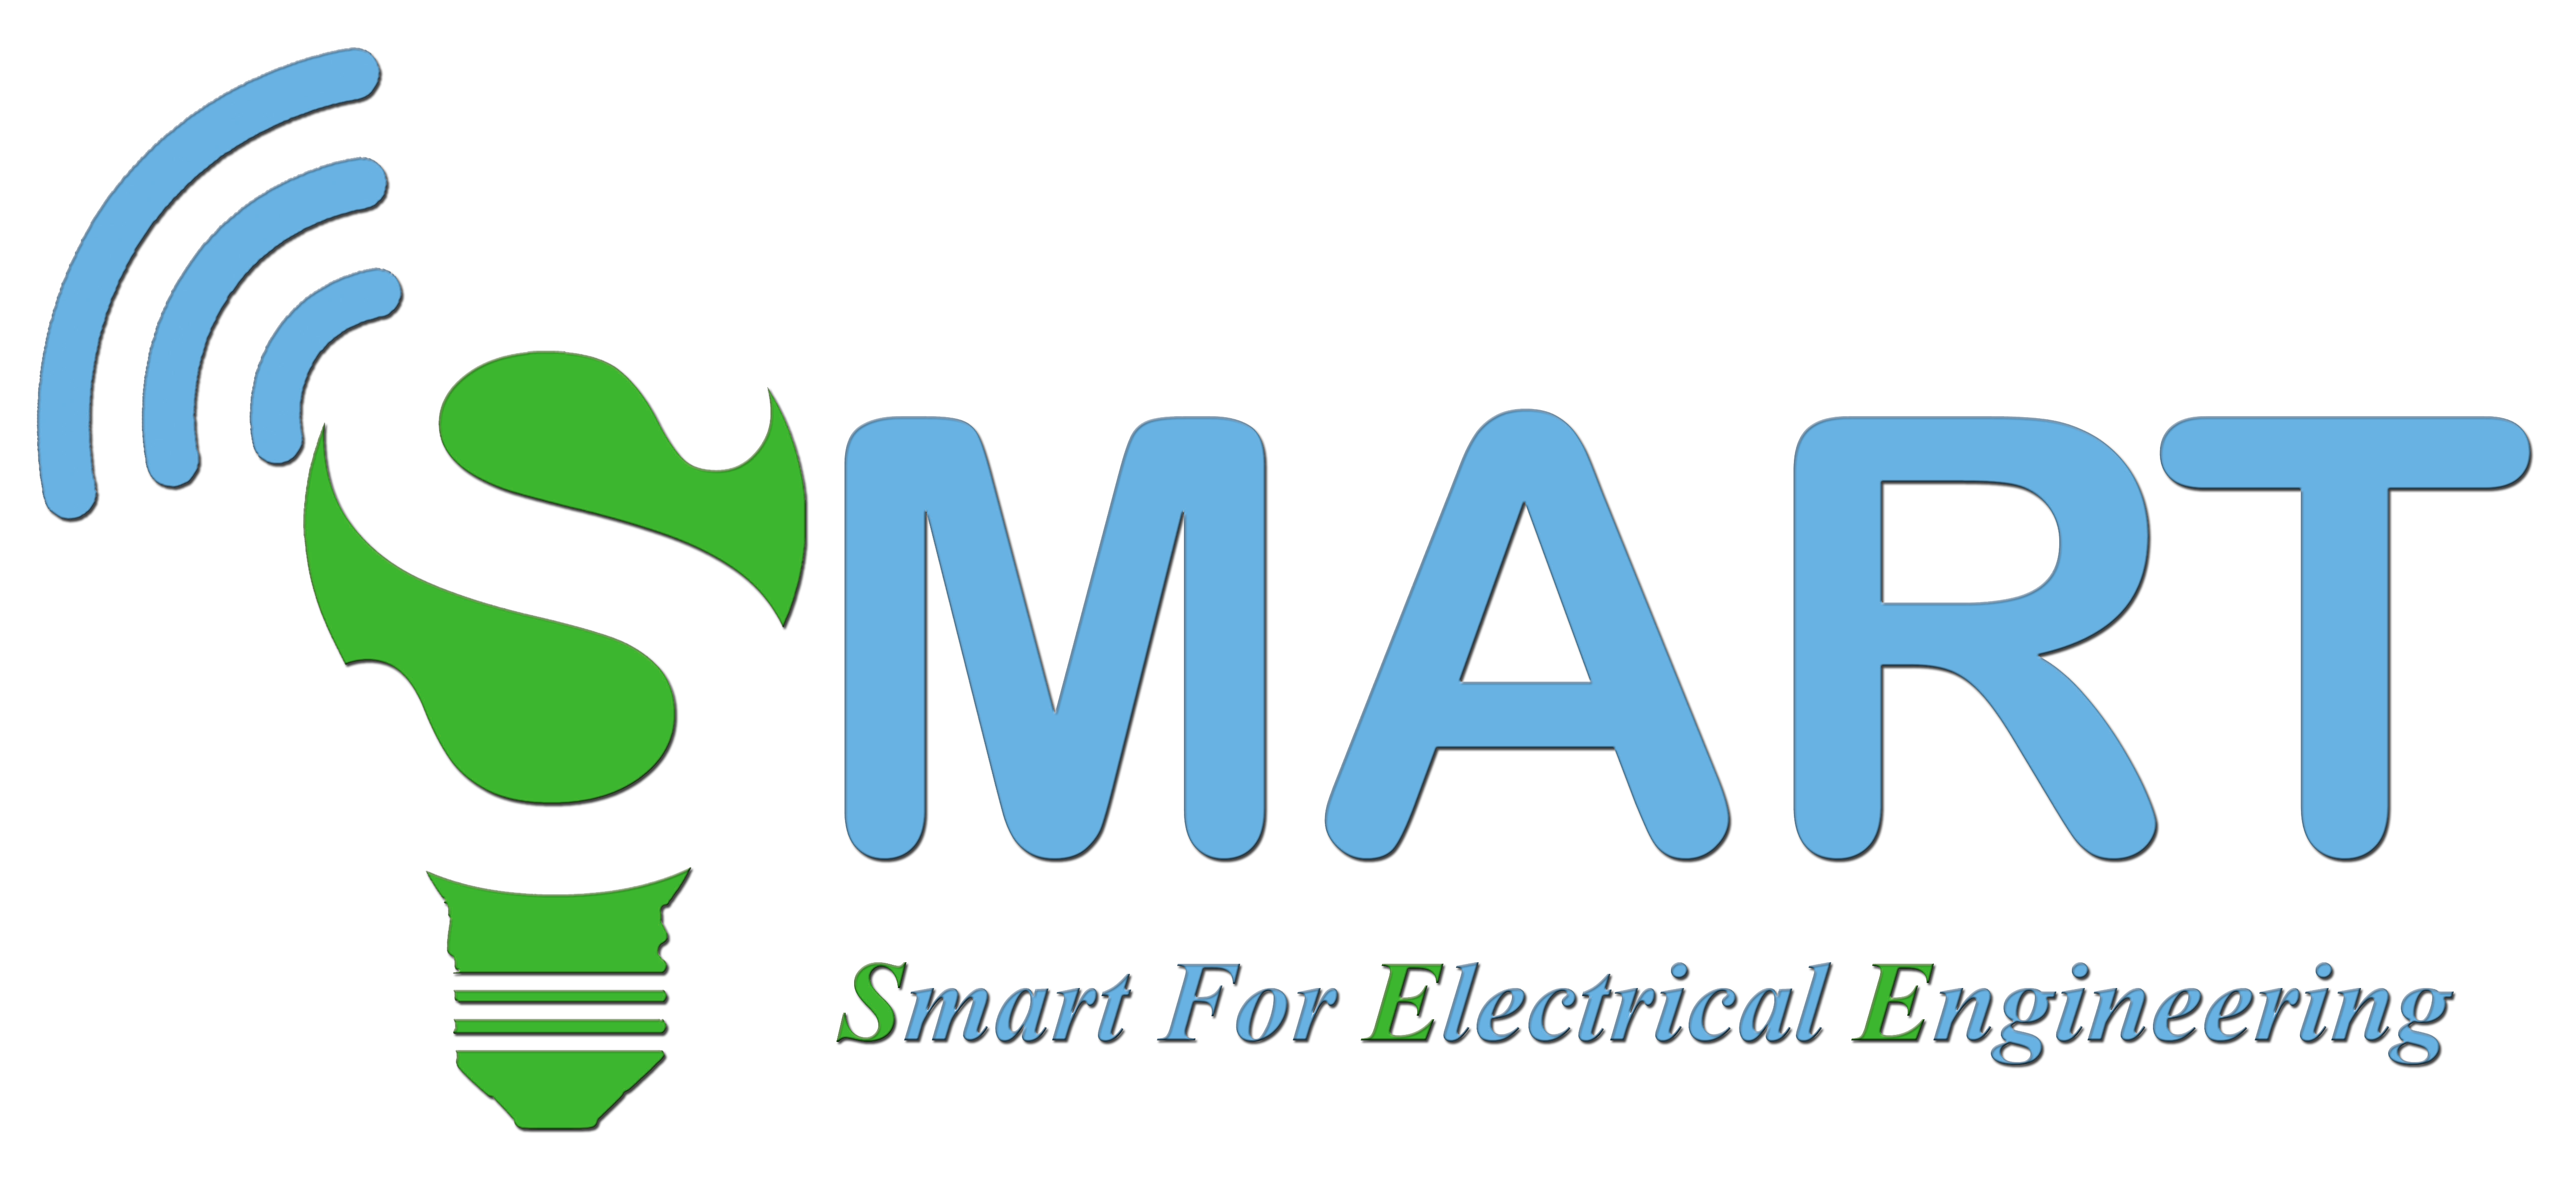 Smart for Electrical Engineering